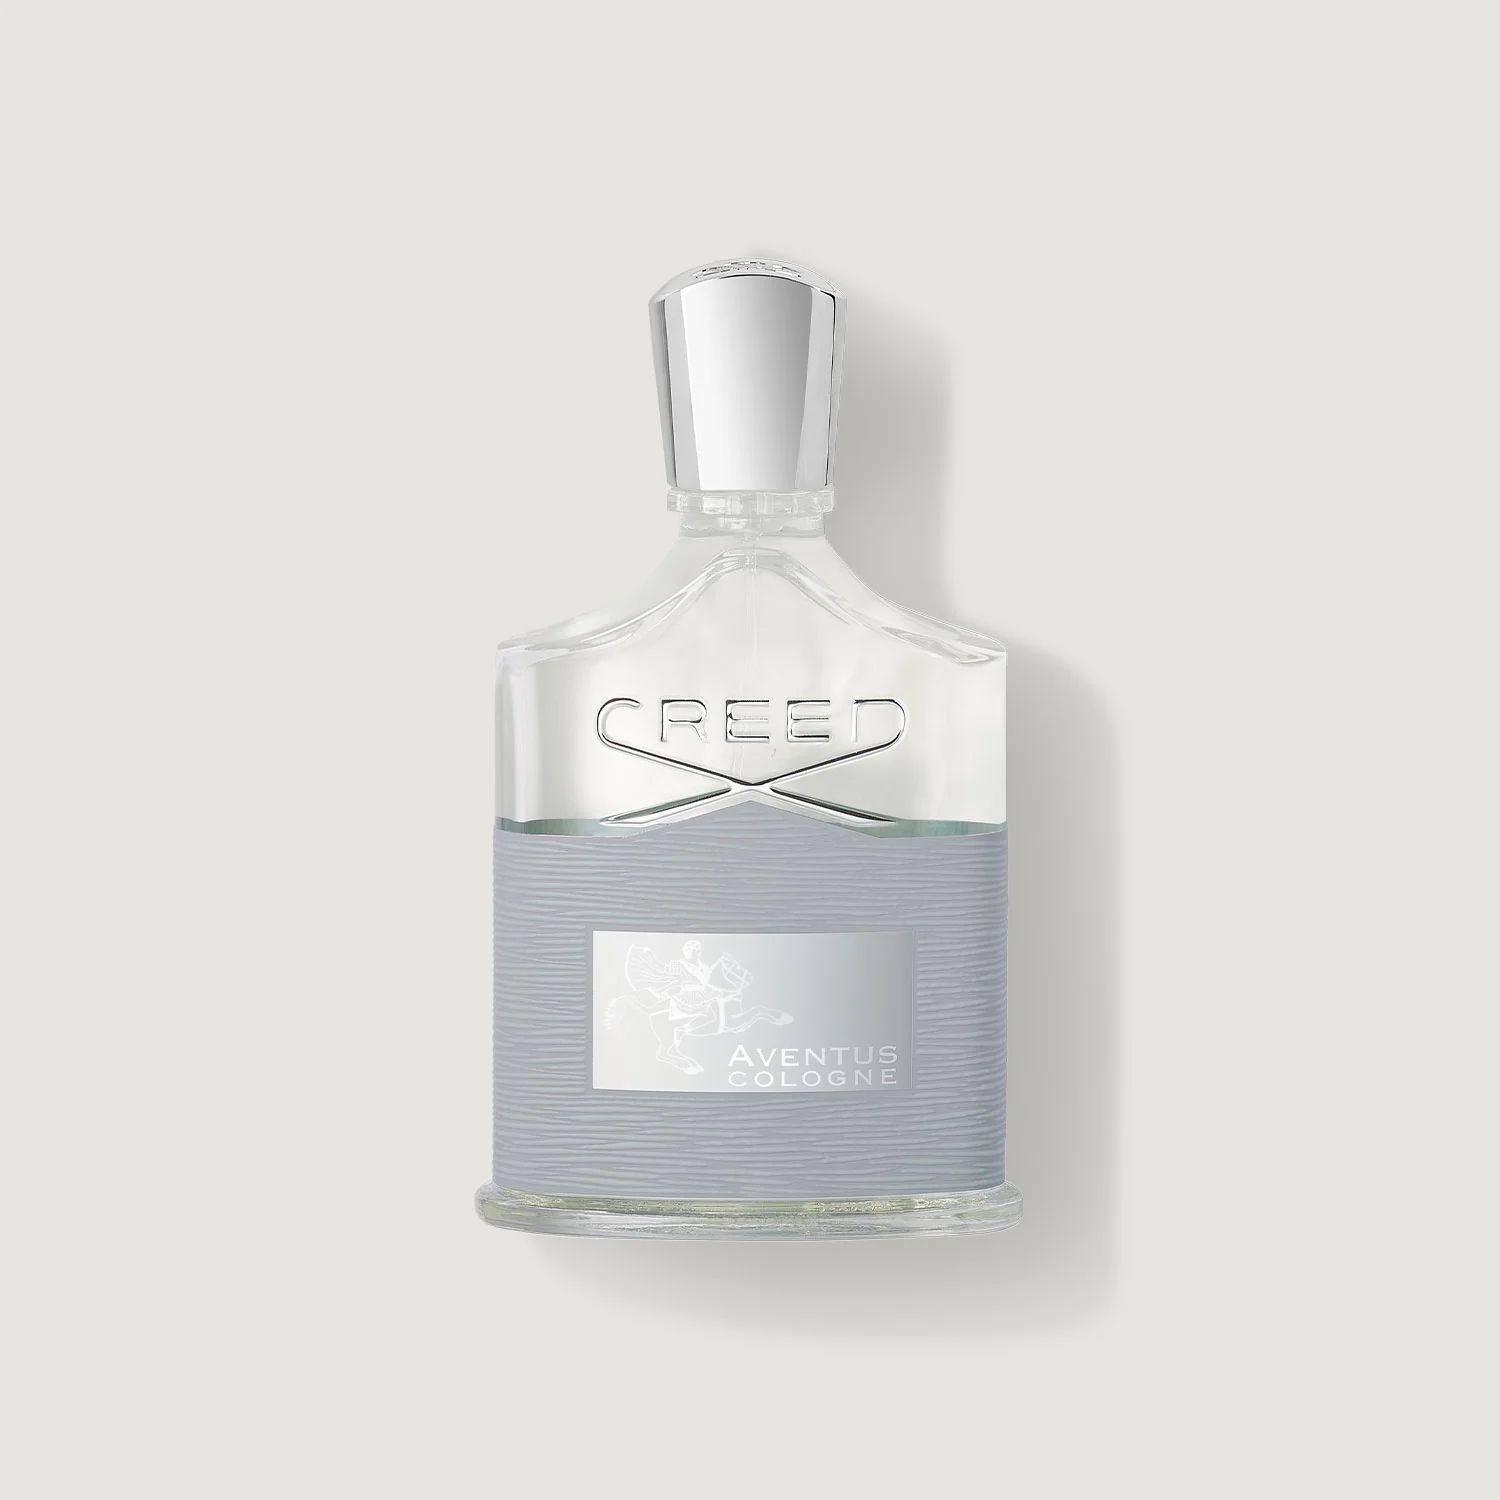 Aventus Cologne | Creed Fragrance UK | Creed Fragrances | Creed